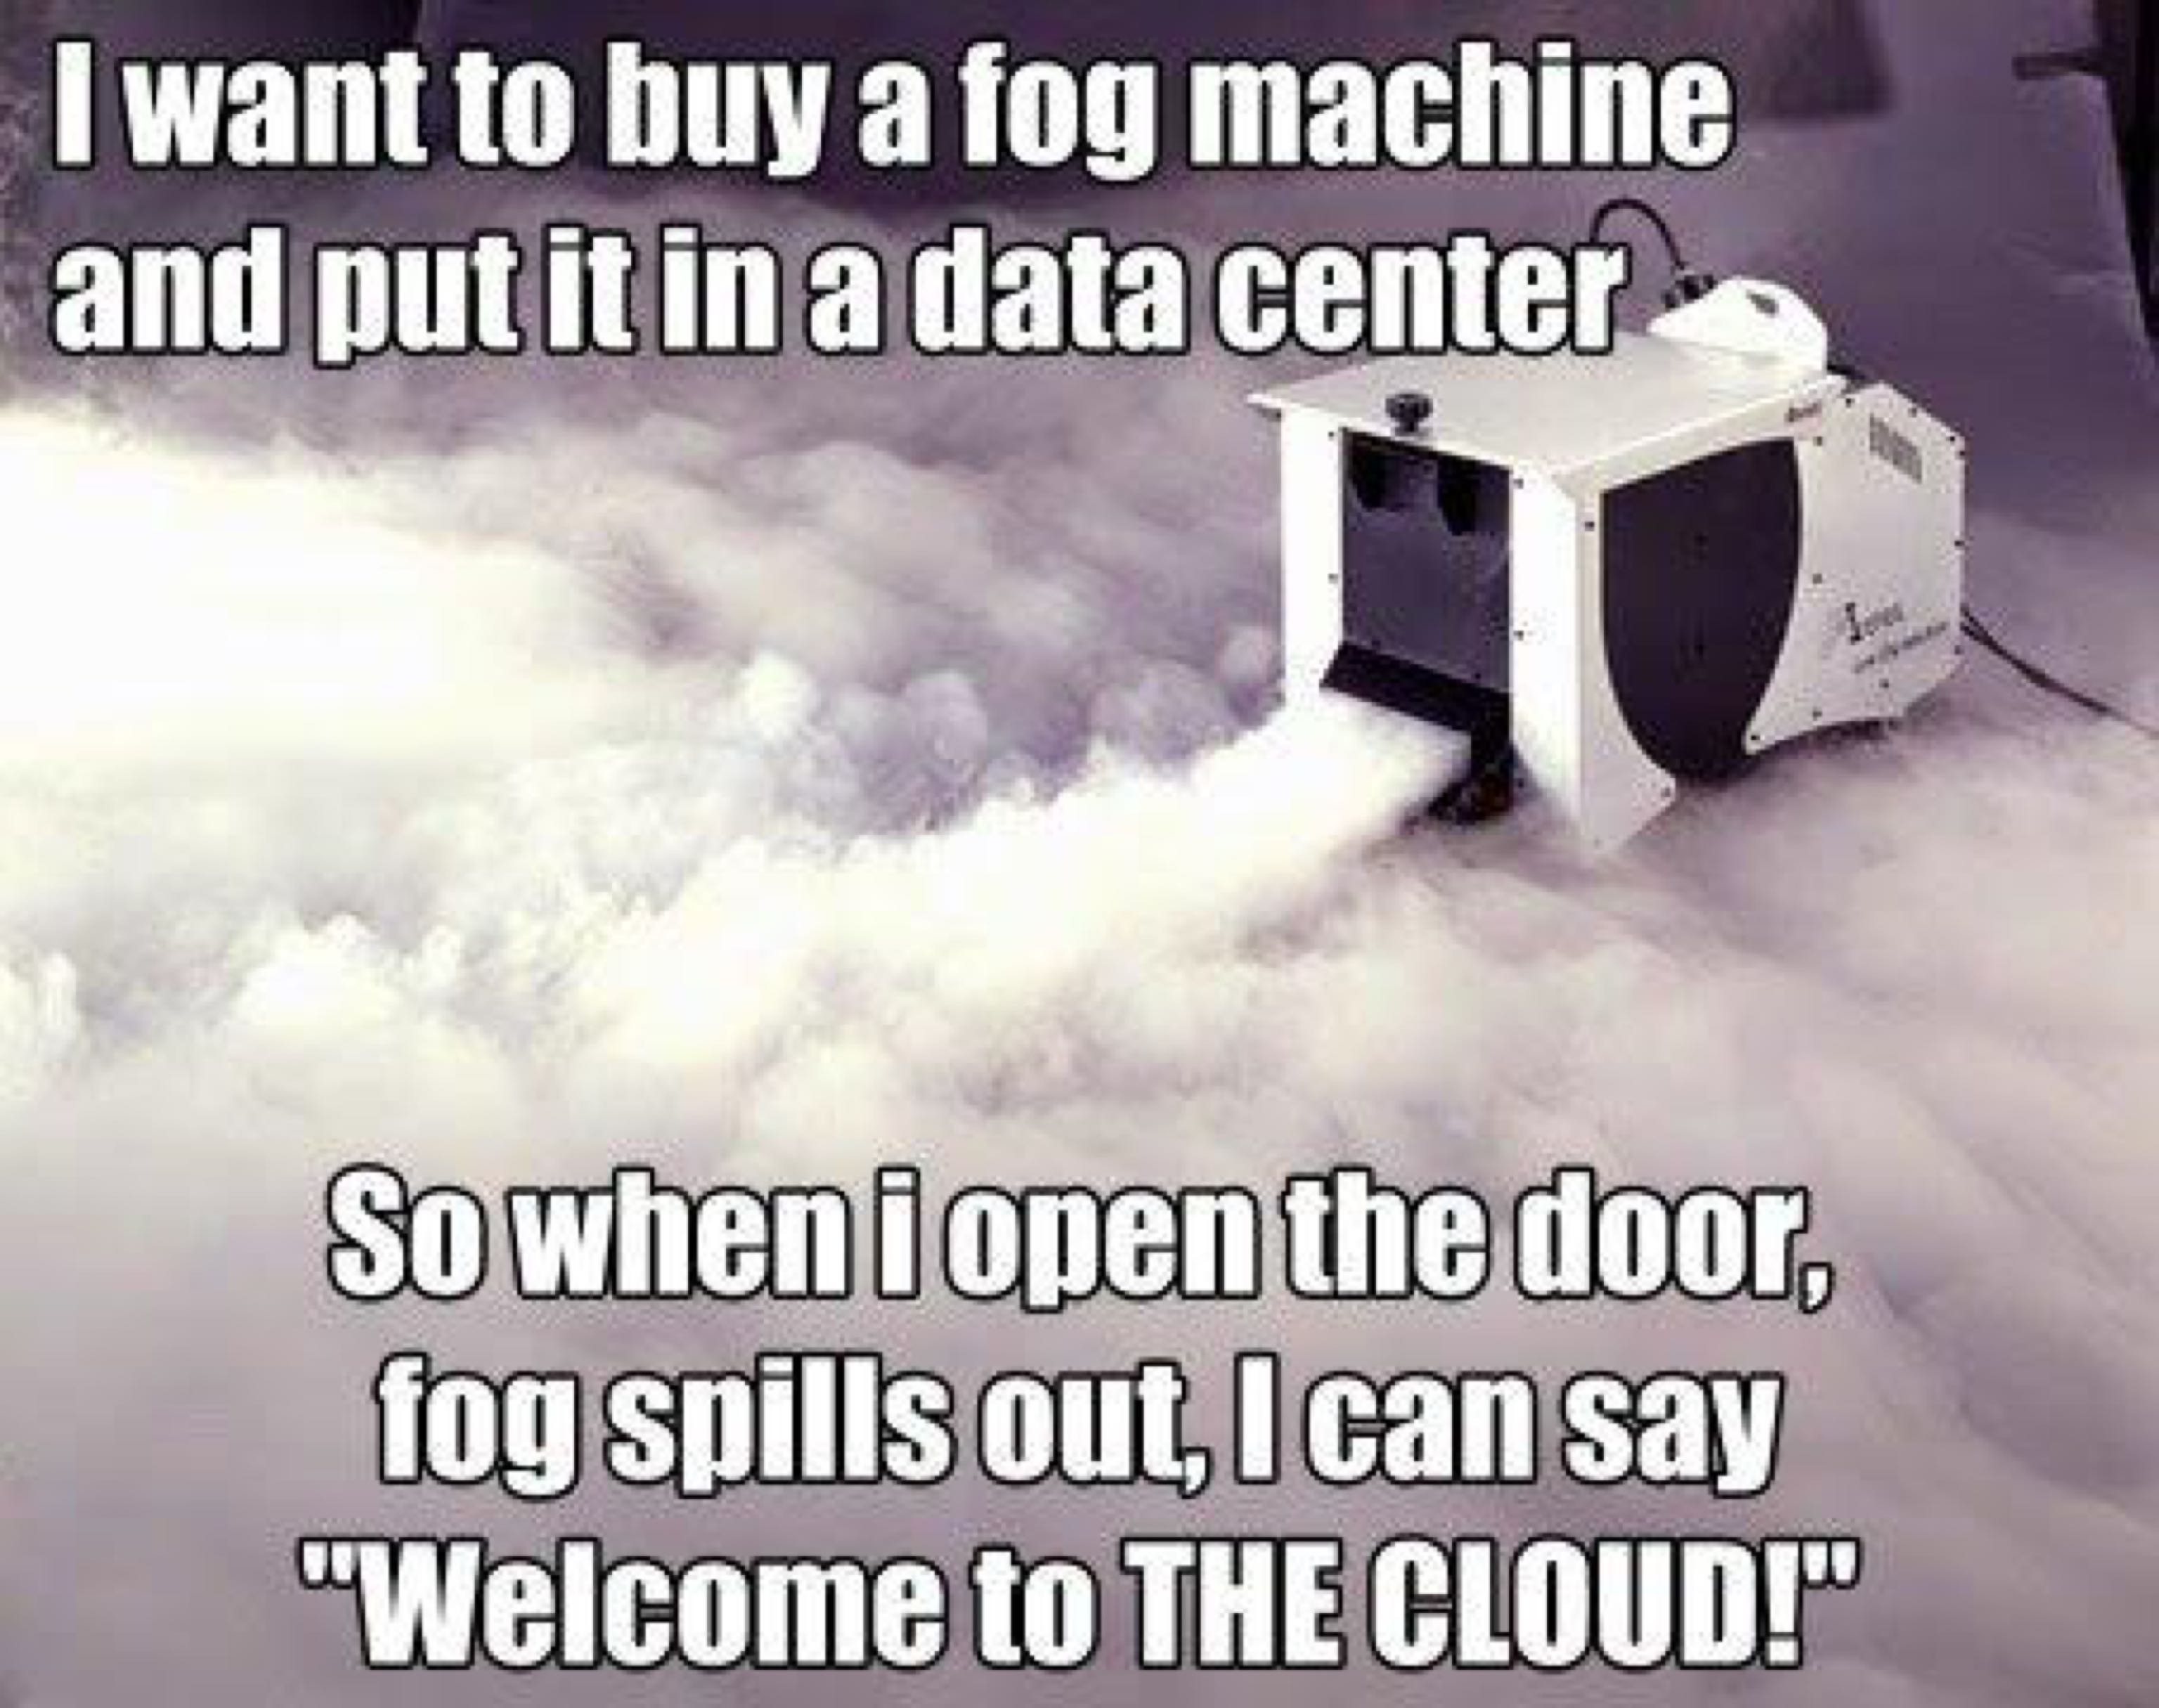 funny meme about wanting to get fog machine for data center so he can welcome people to the cloud